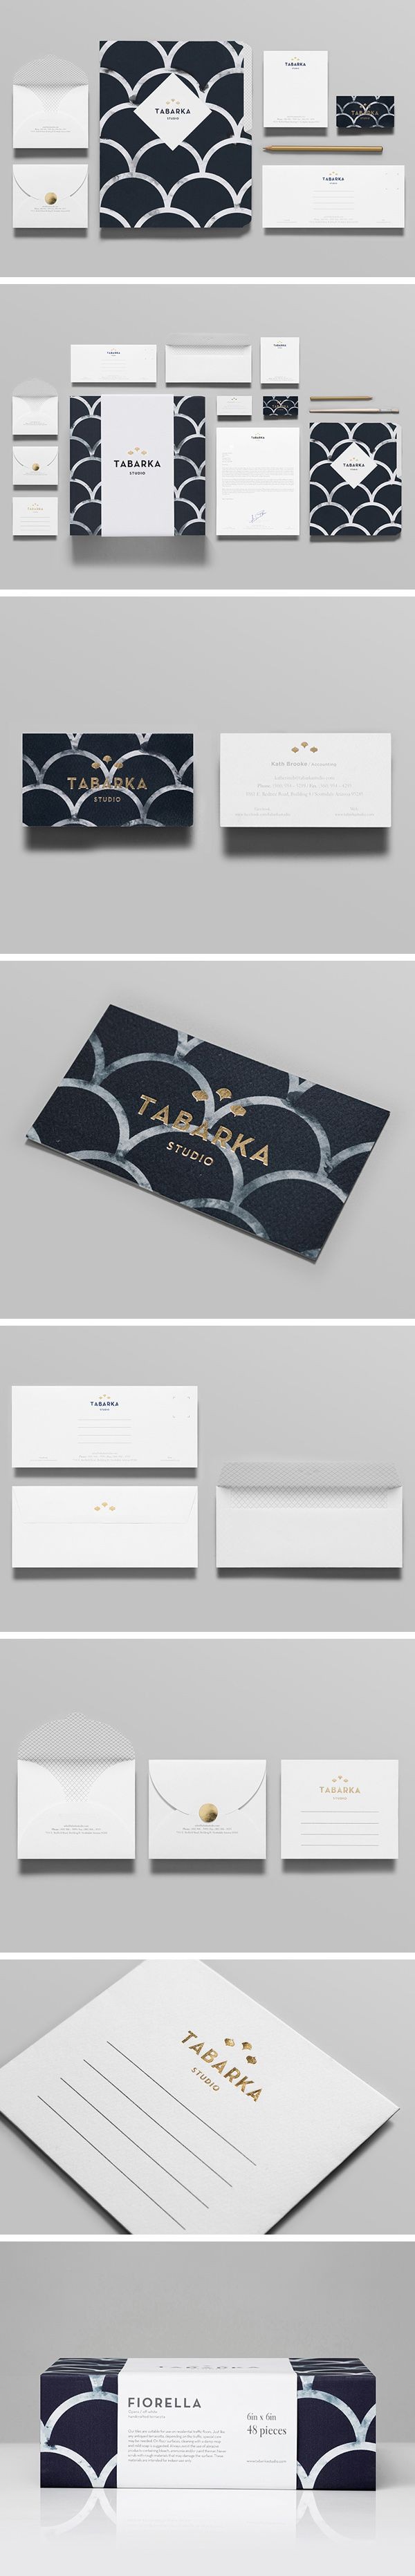 Tabarka Studio. The brand pattern is really simple...